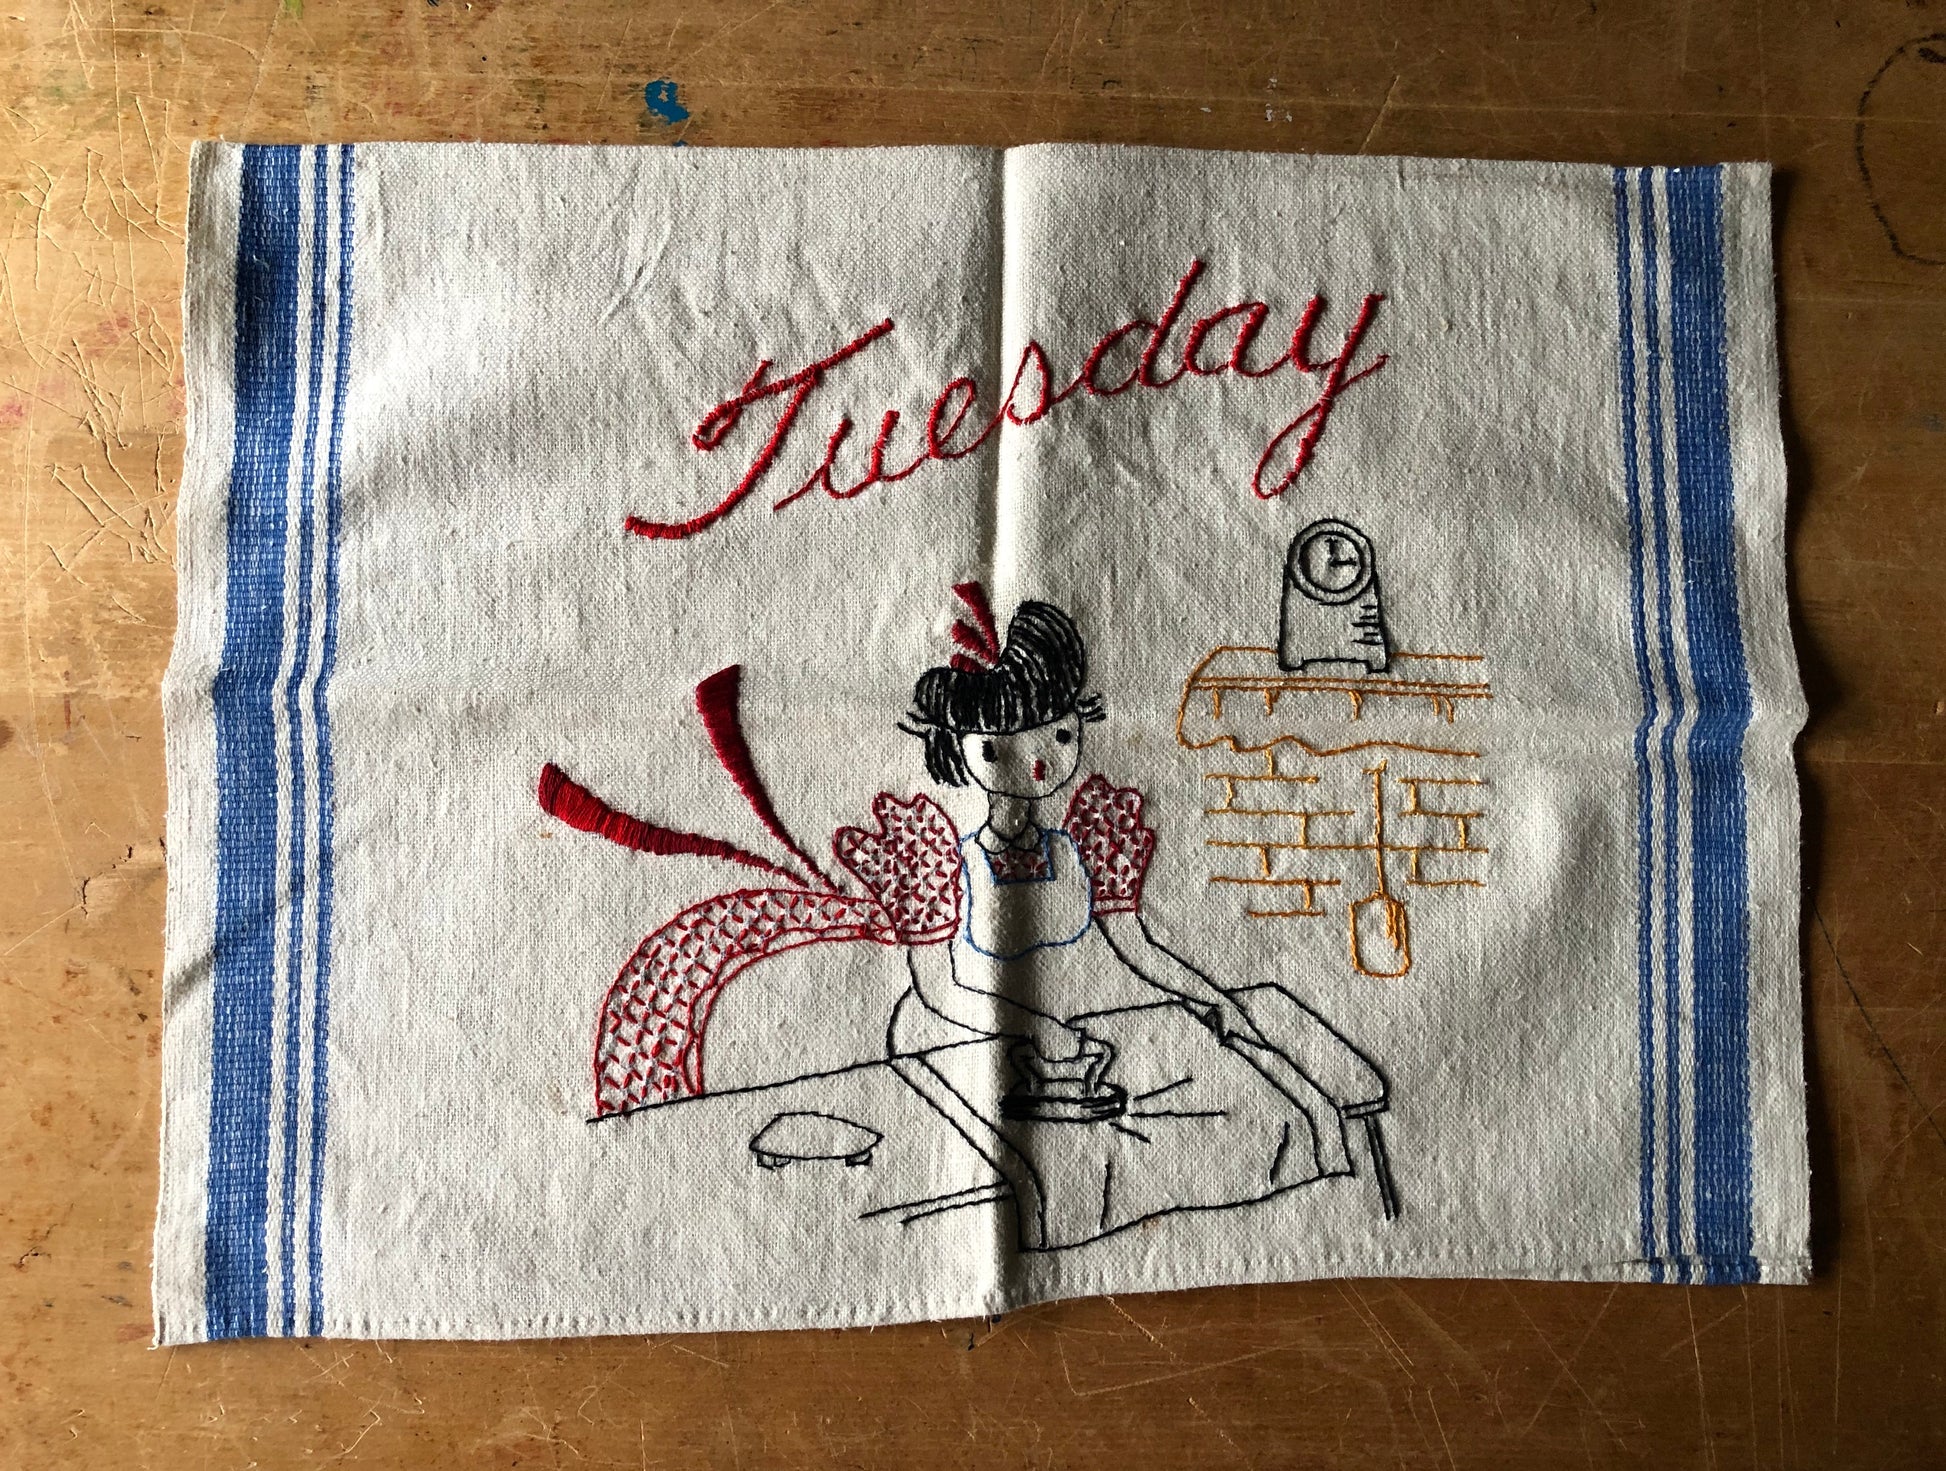 Embroidered Day of the Week Chores Kitchen Towels, (c.1960s)